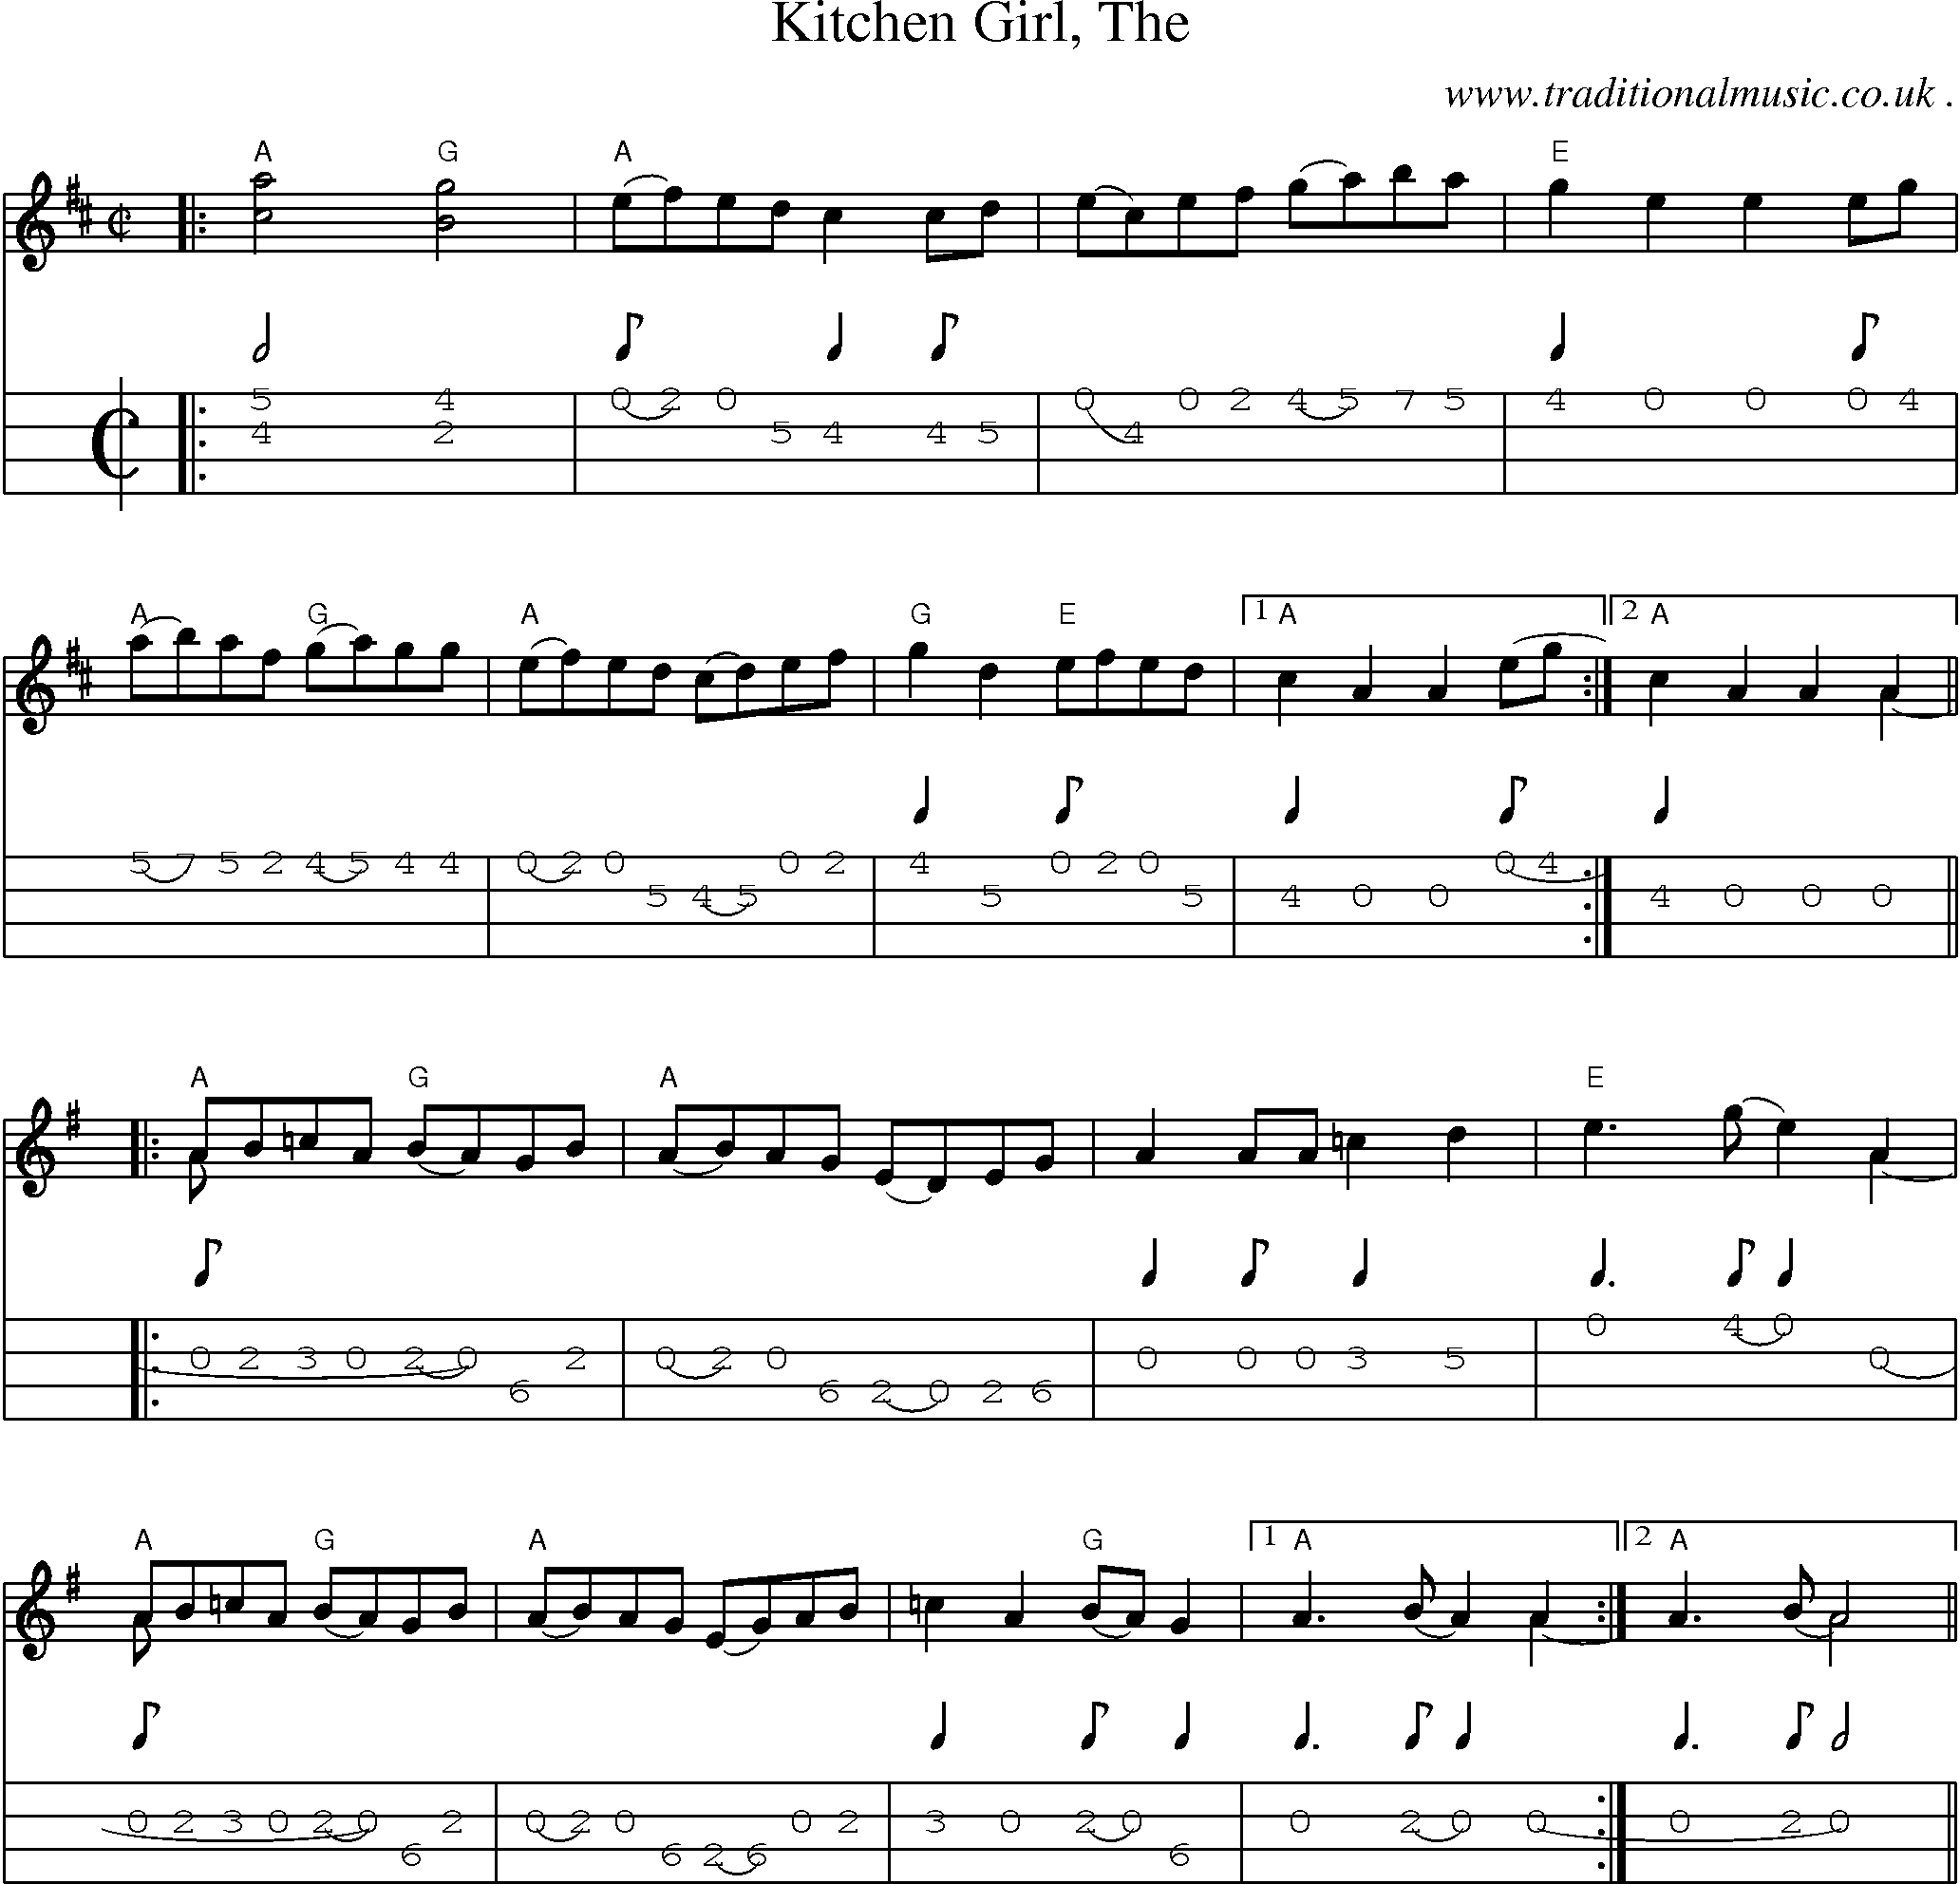 Music Score and Guitar Tabs for Kitchen Girl The